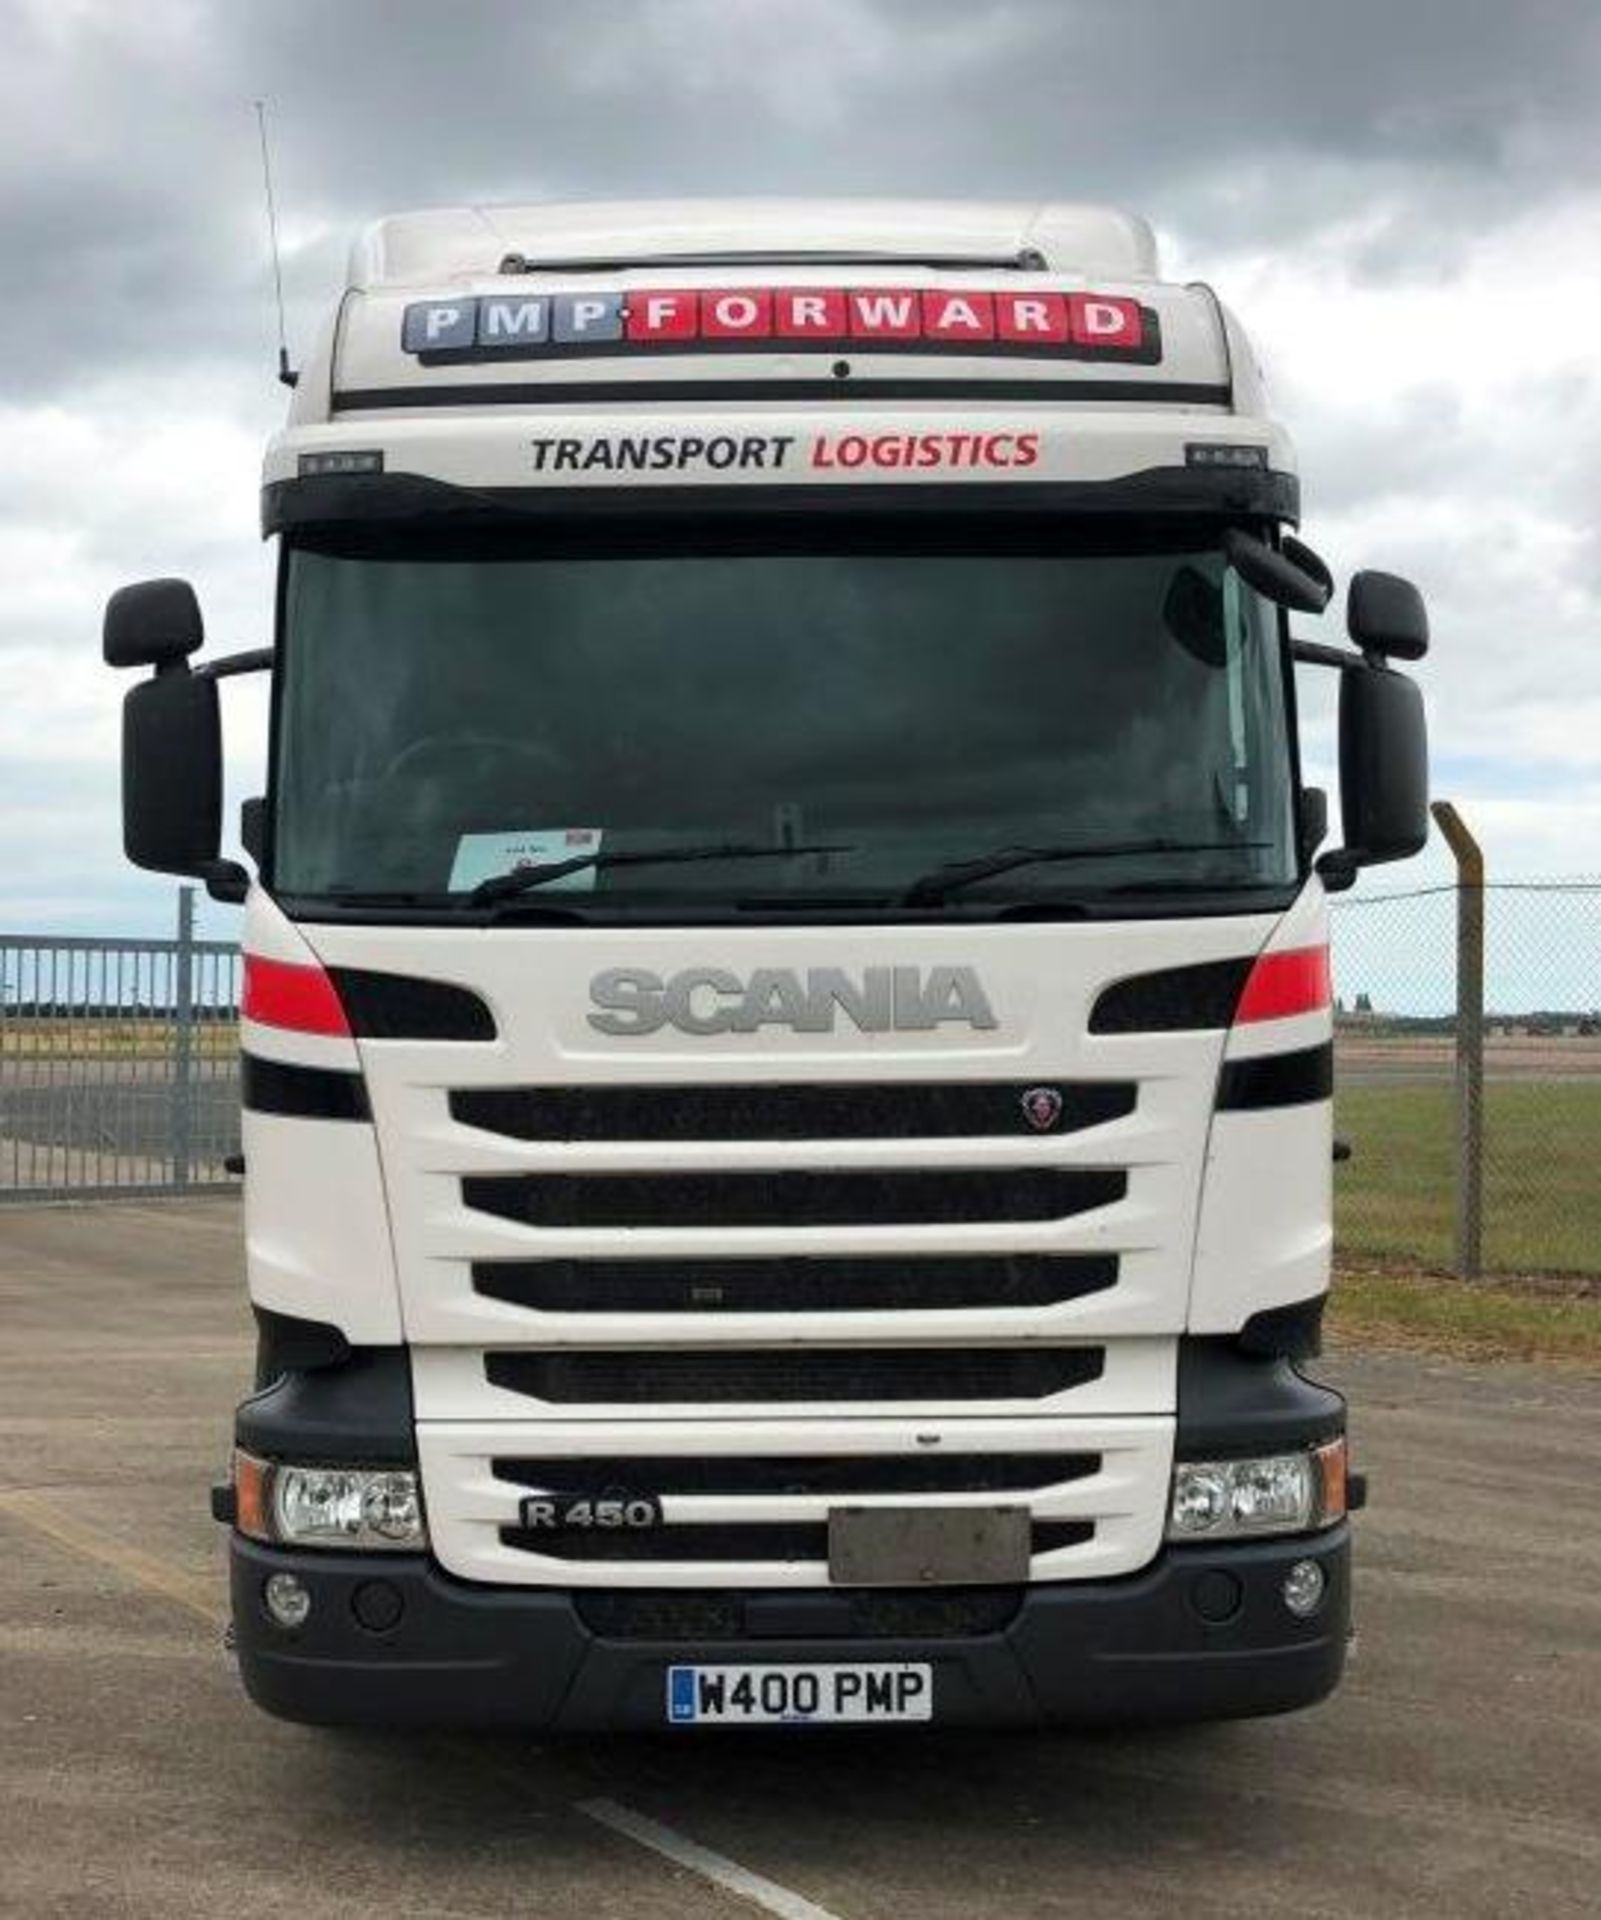 Scania R450 LA 6X2/2MNA High Line tractor unit, 2 Pedal Opticruise Gearbox, Registration number